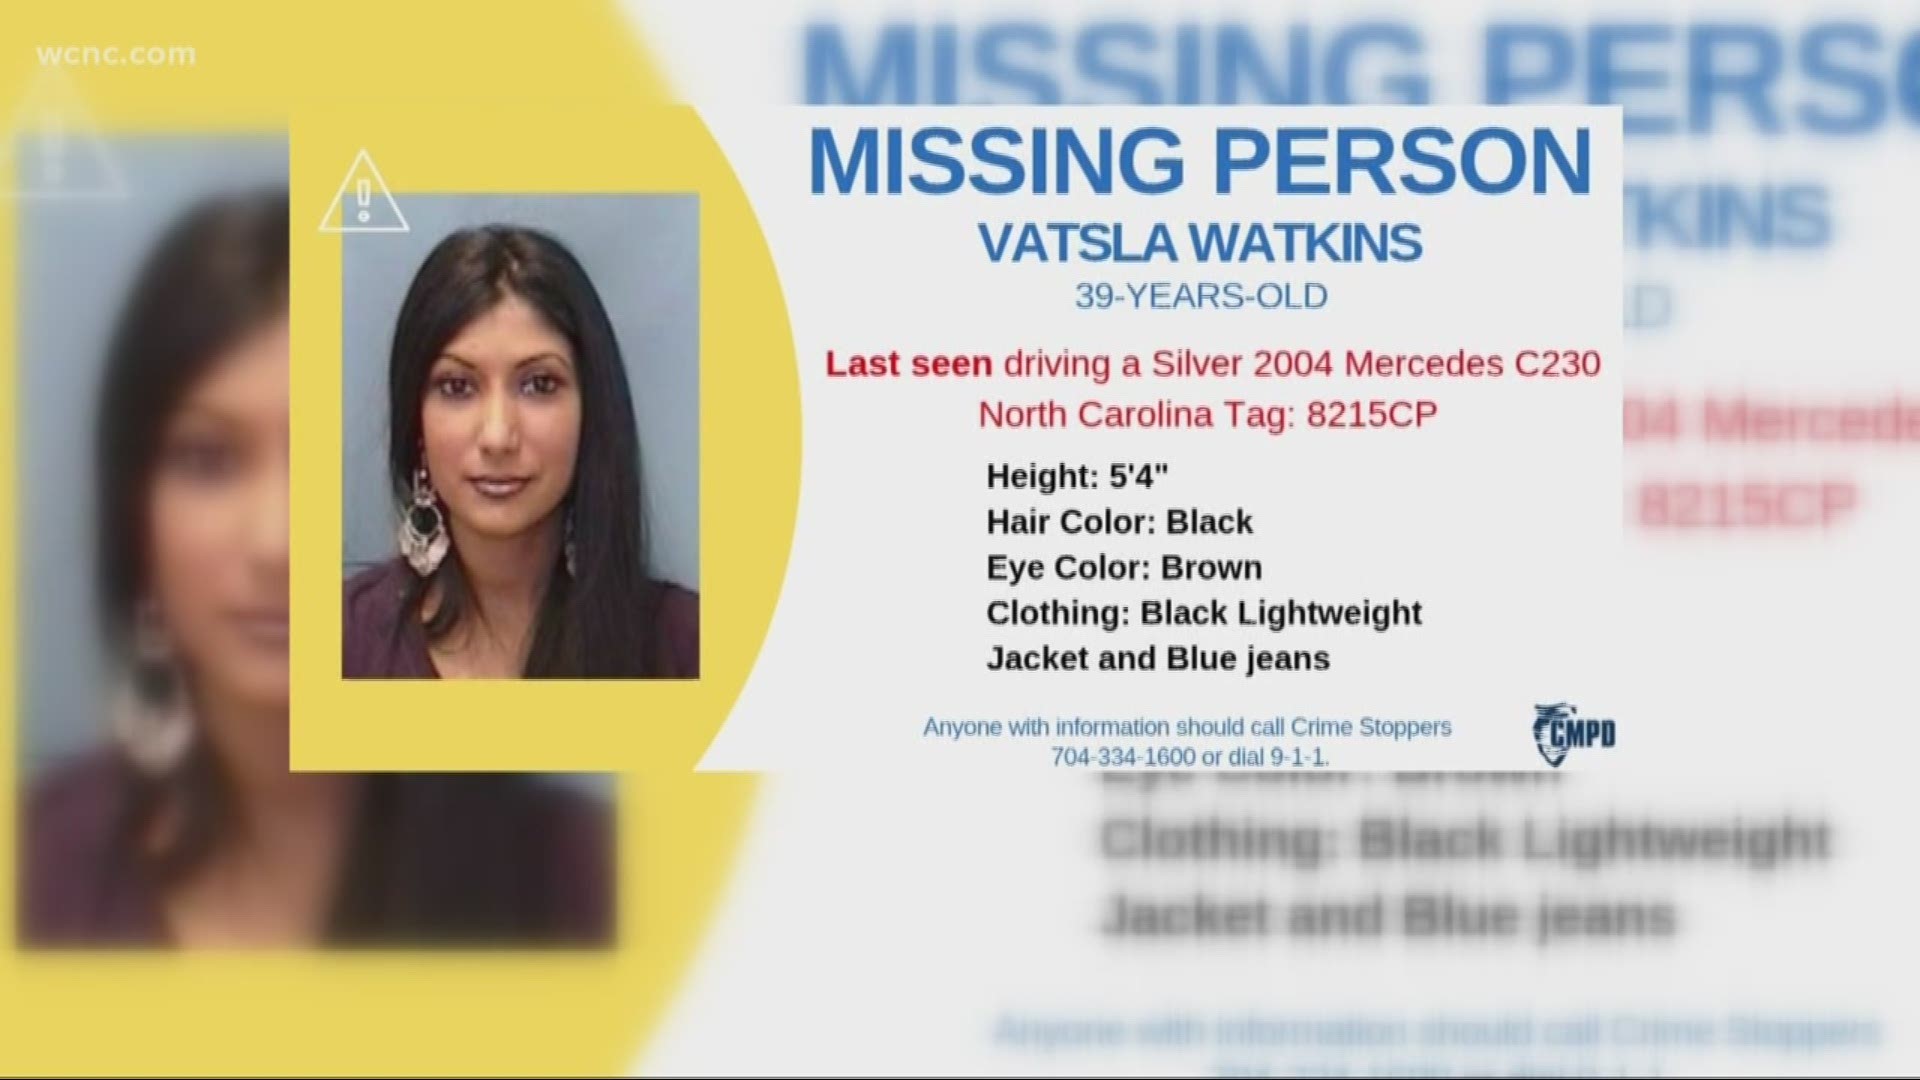 Vatsla Watkins's family says she was last seen leaving her Myers Park home last Monday morning. Friday, her car was spotted at a Lake Wylie Marina. But seven days into the investigation, there's still no sign of her.